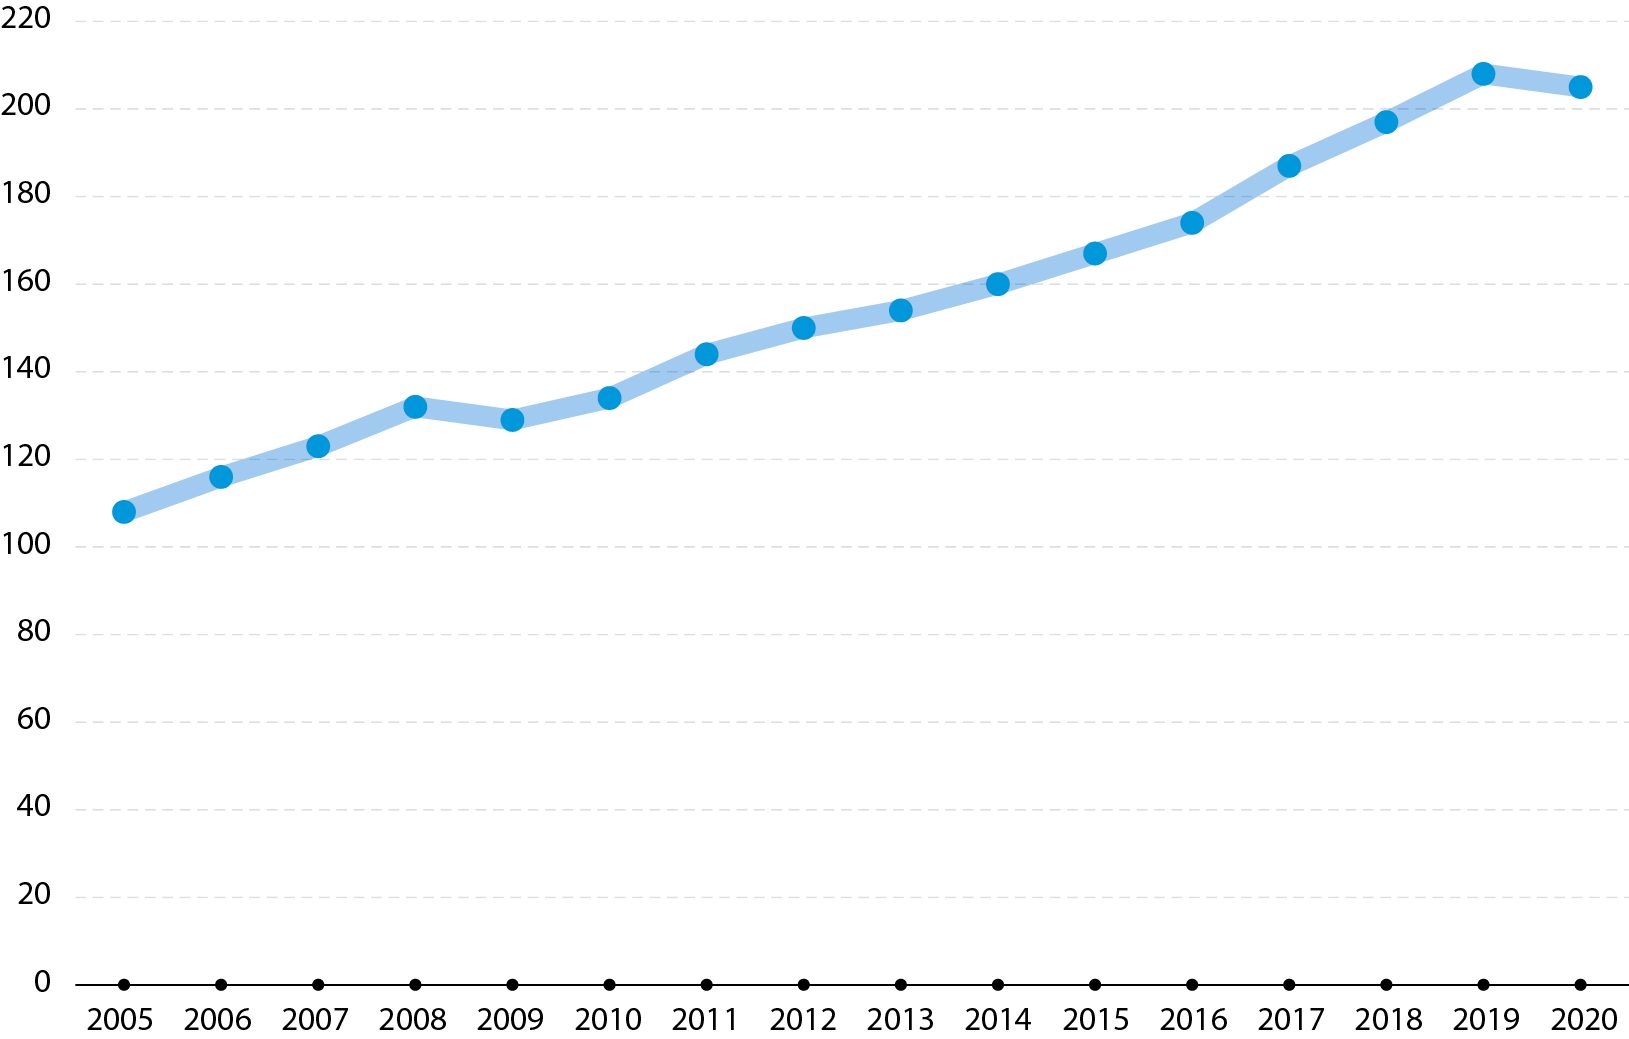 Business expenditure on research and development, in billion euro. Data for the EU. Annual data for 2005 to 2020. Line graph.